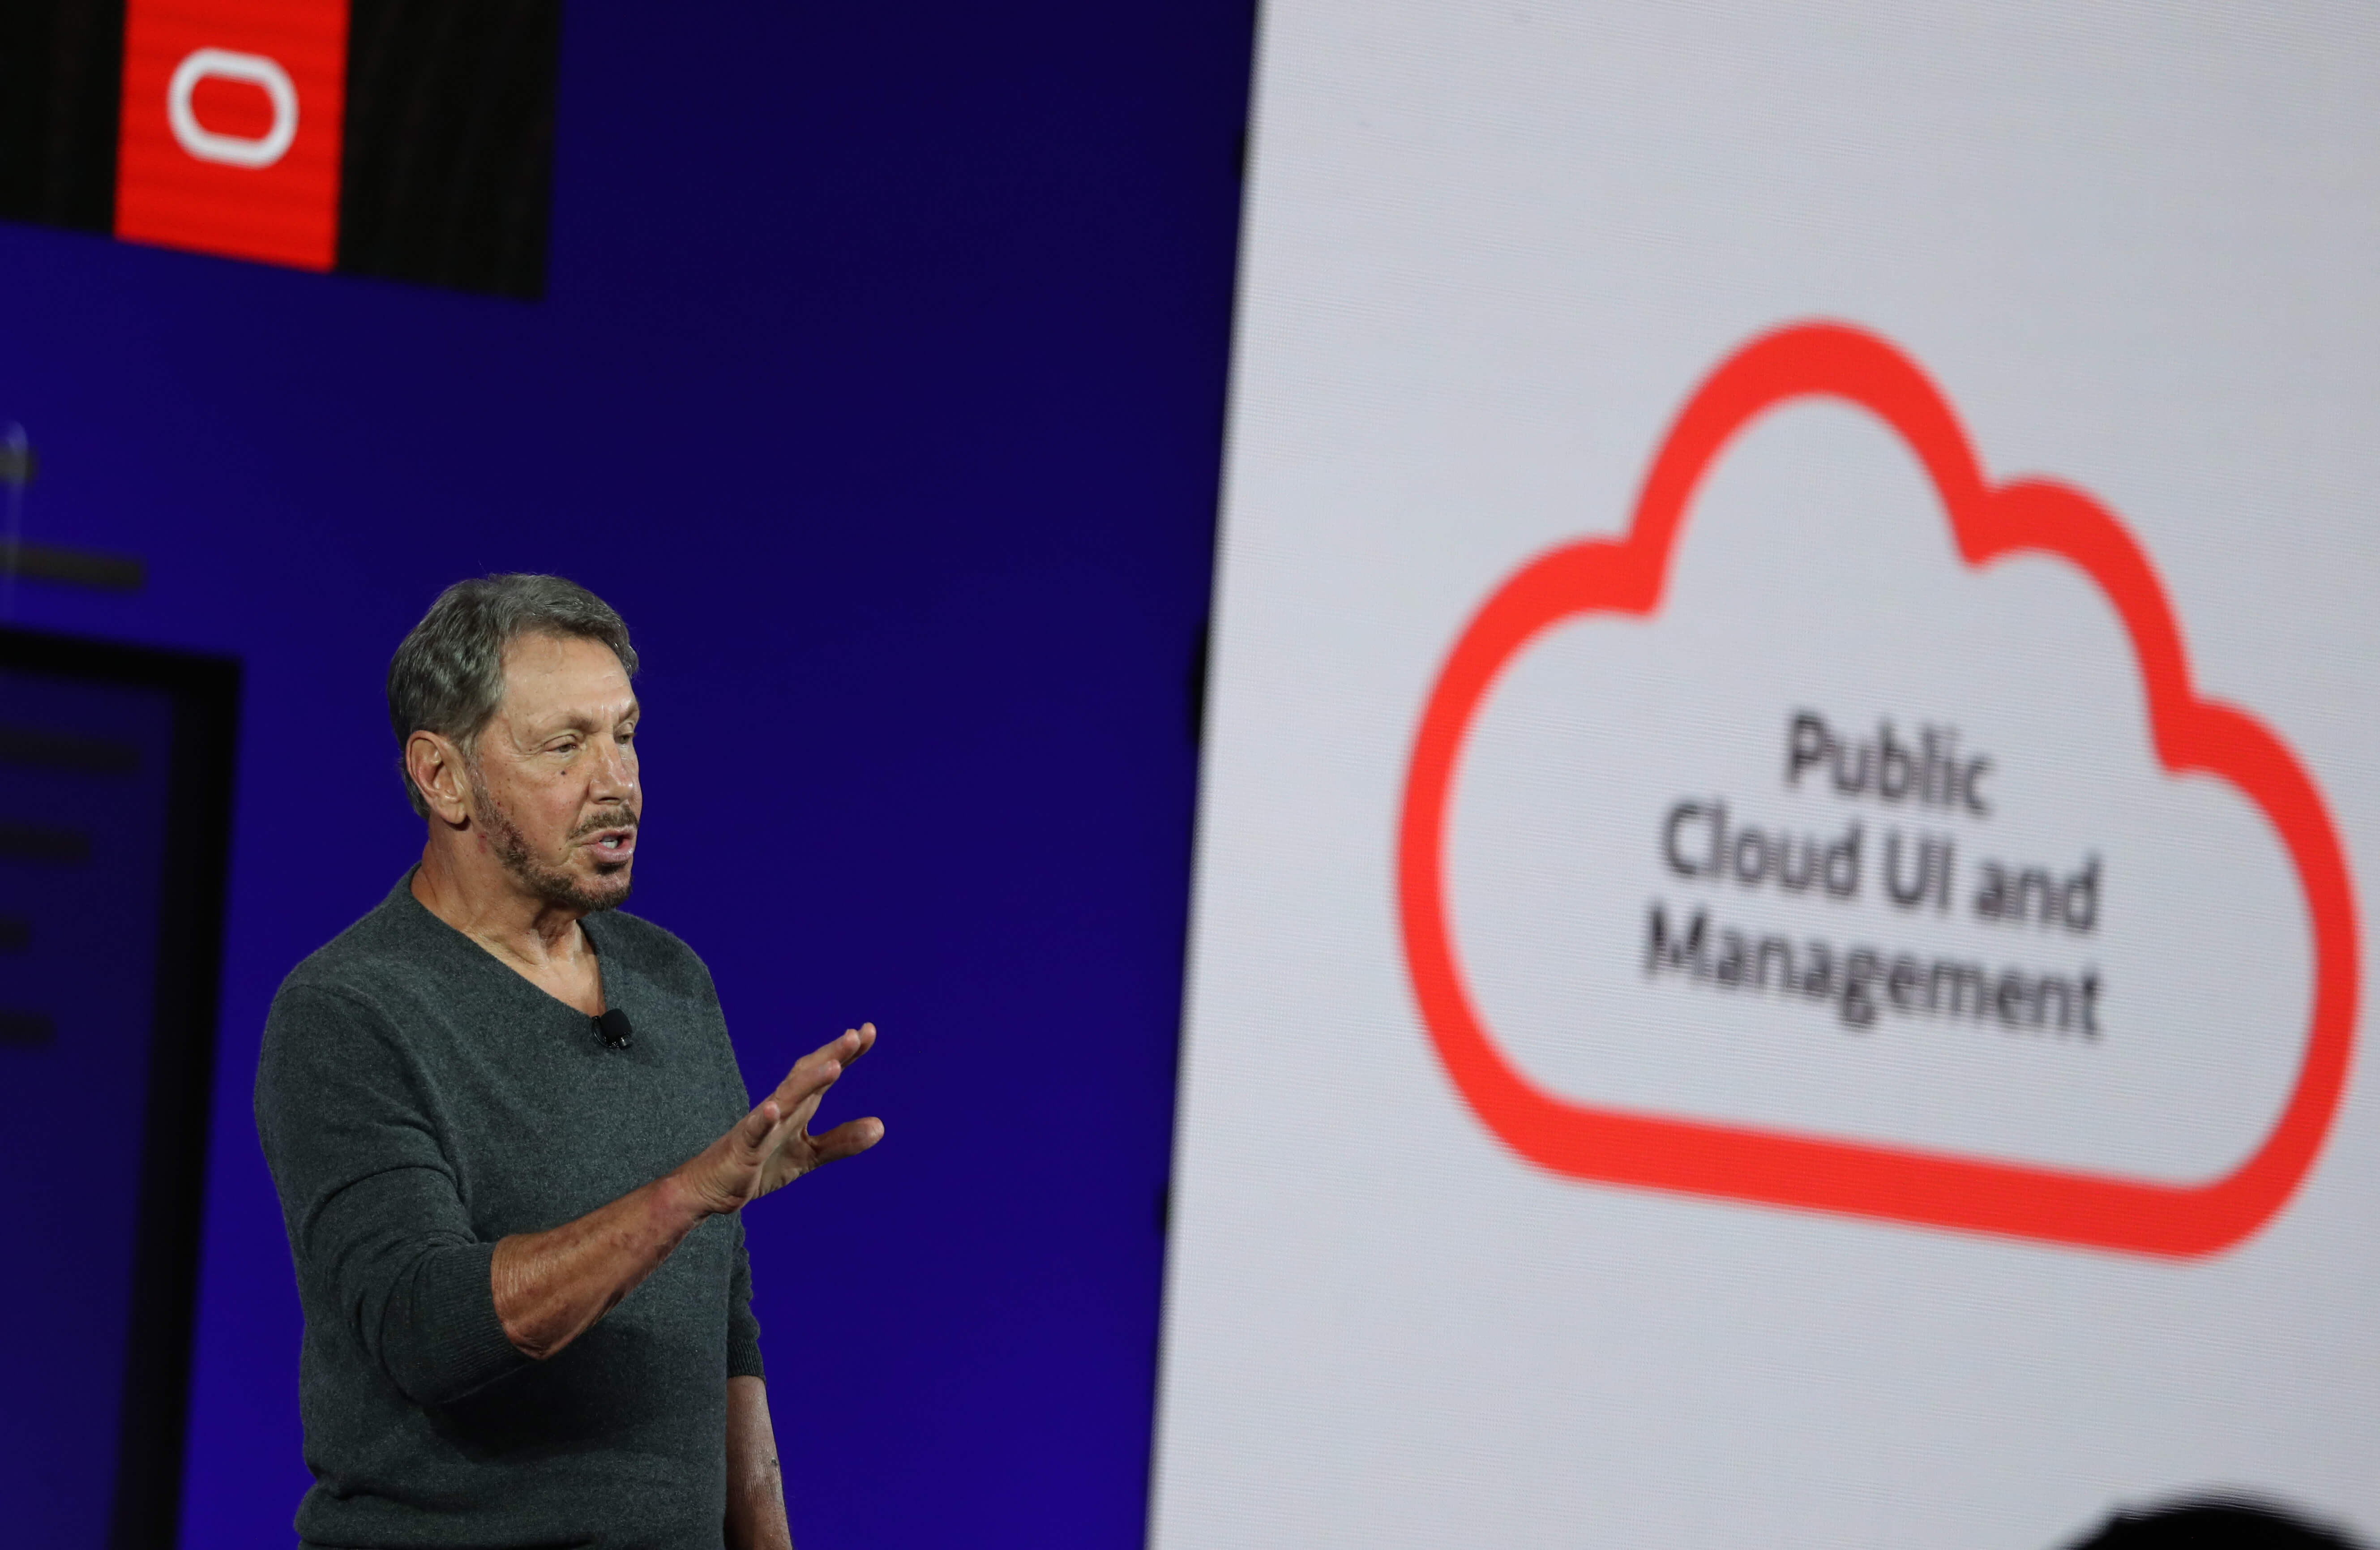 Oracle's Larry Ellison delivers a keynote at the 2019 Oracle OpenWorld on September 16, 2019 in San Francisco, California. Oracle chairman of the board and chief technology officer Larry Ellison kicked off the 2019 Oracle OpenWorld.